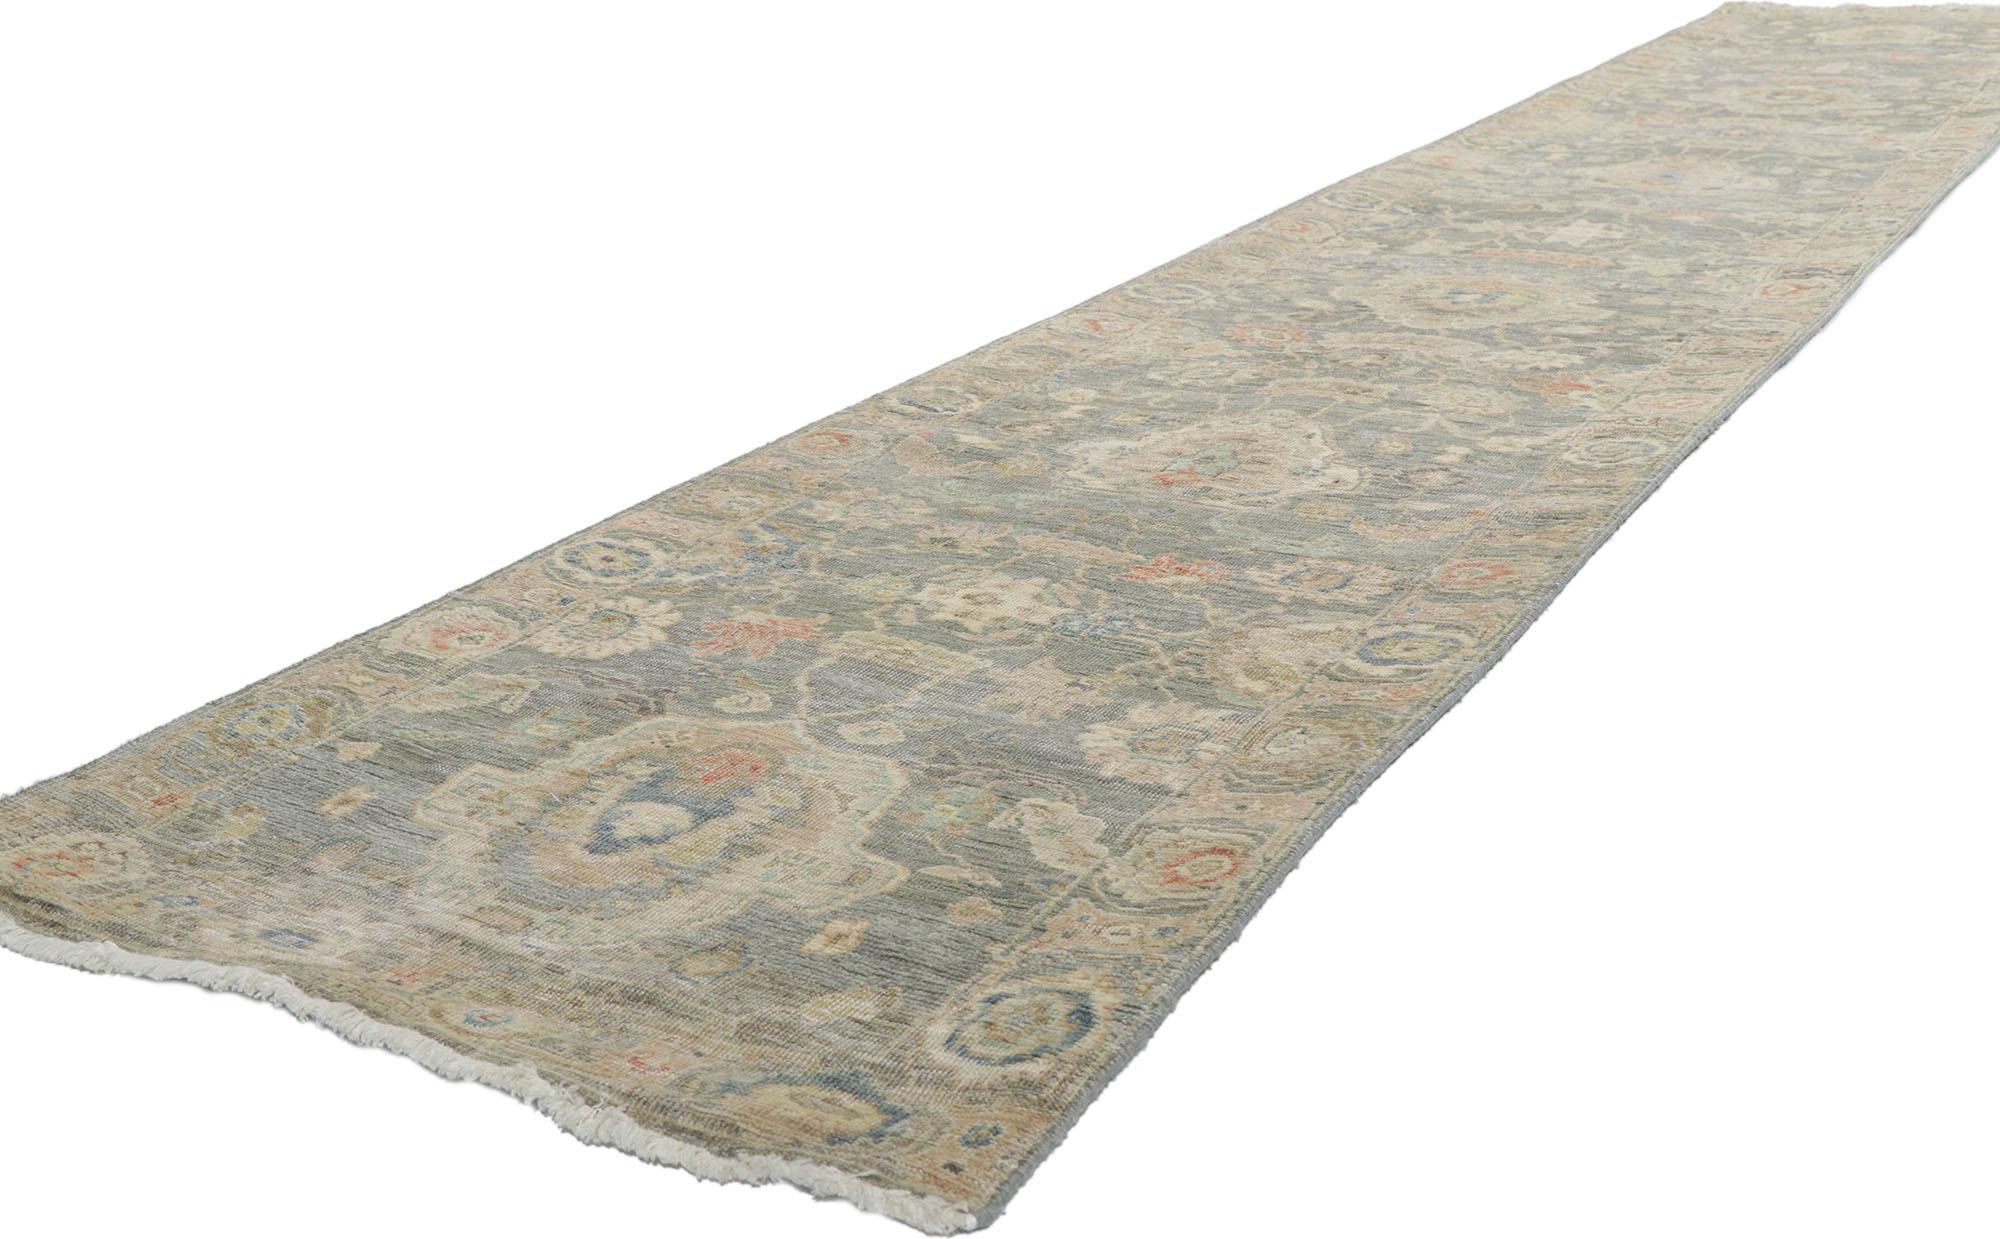 30715 Vintage-Inspired Modern Oushak Rug, 02'04 x 13'09.
Emanating traditional sensibility and rugged beauty with a neutral color palette, this hand-knotted wool distressed Indian Oushak runner creates an inimitable warmth and calming ambiance. The